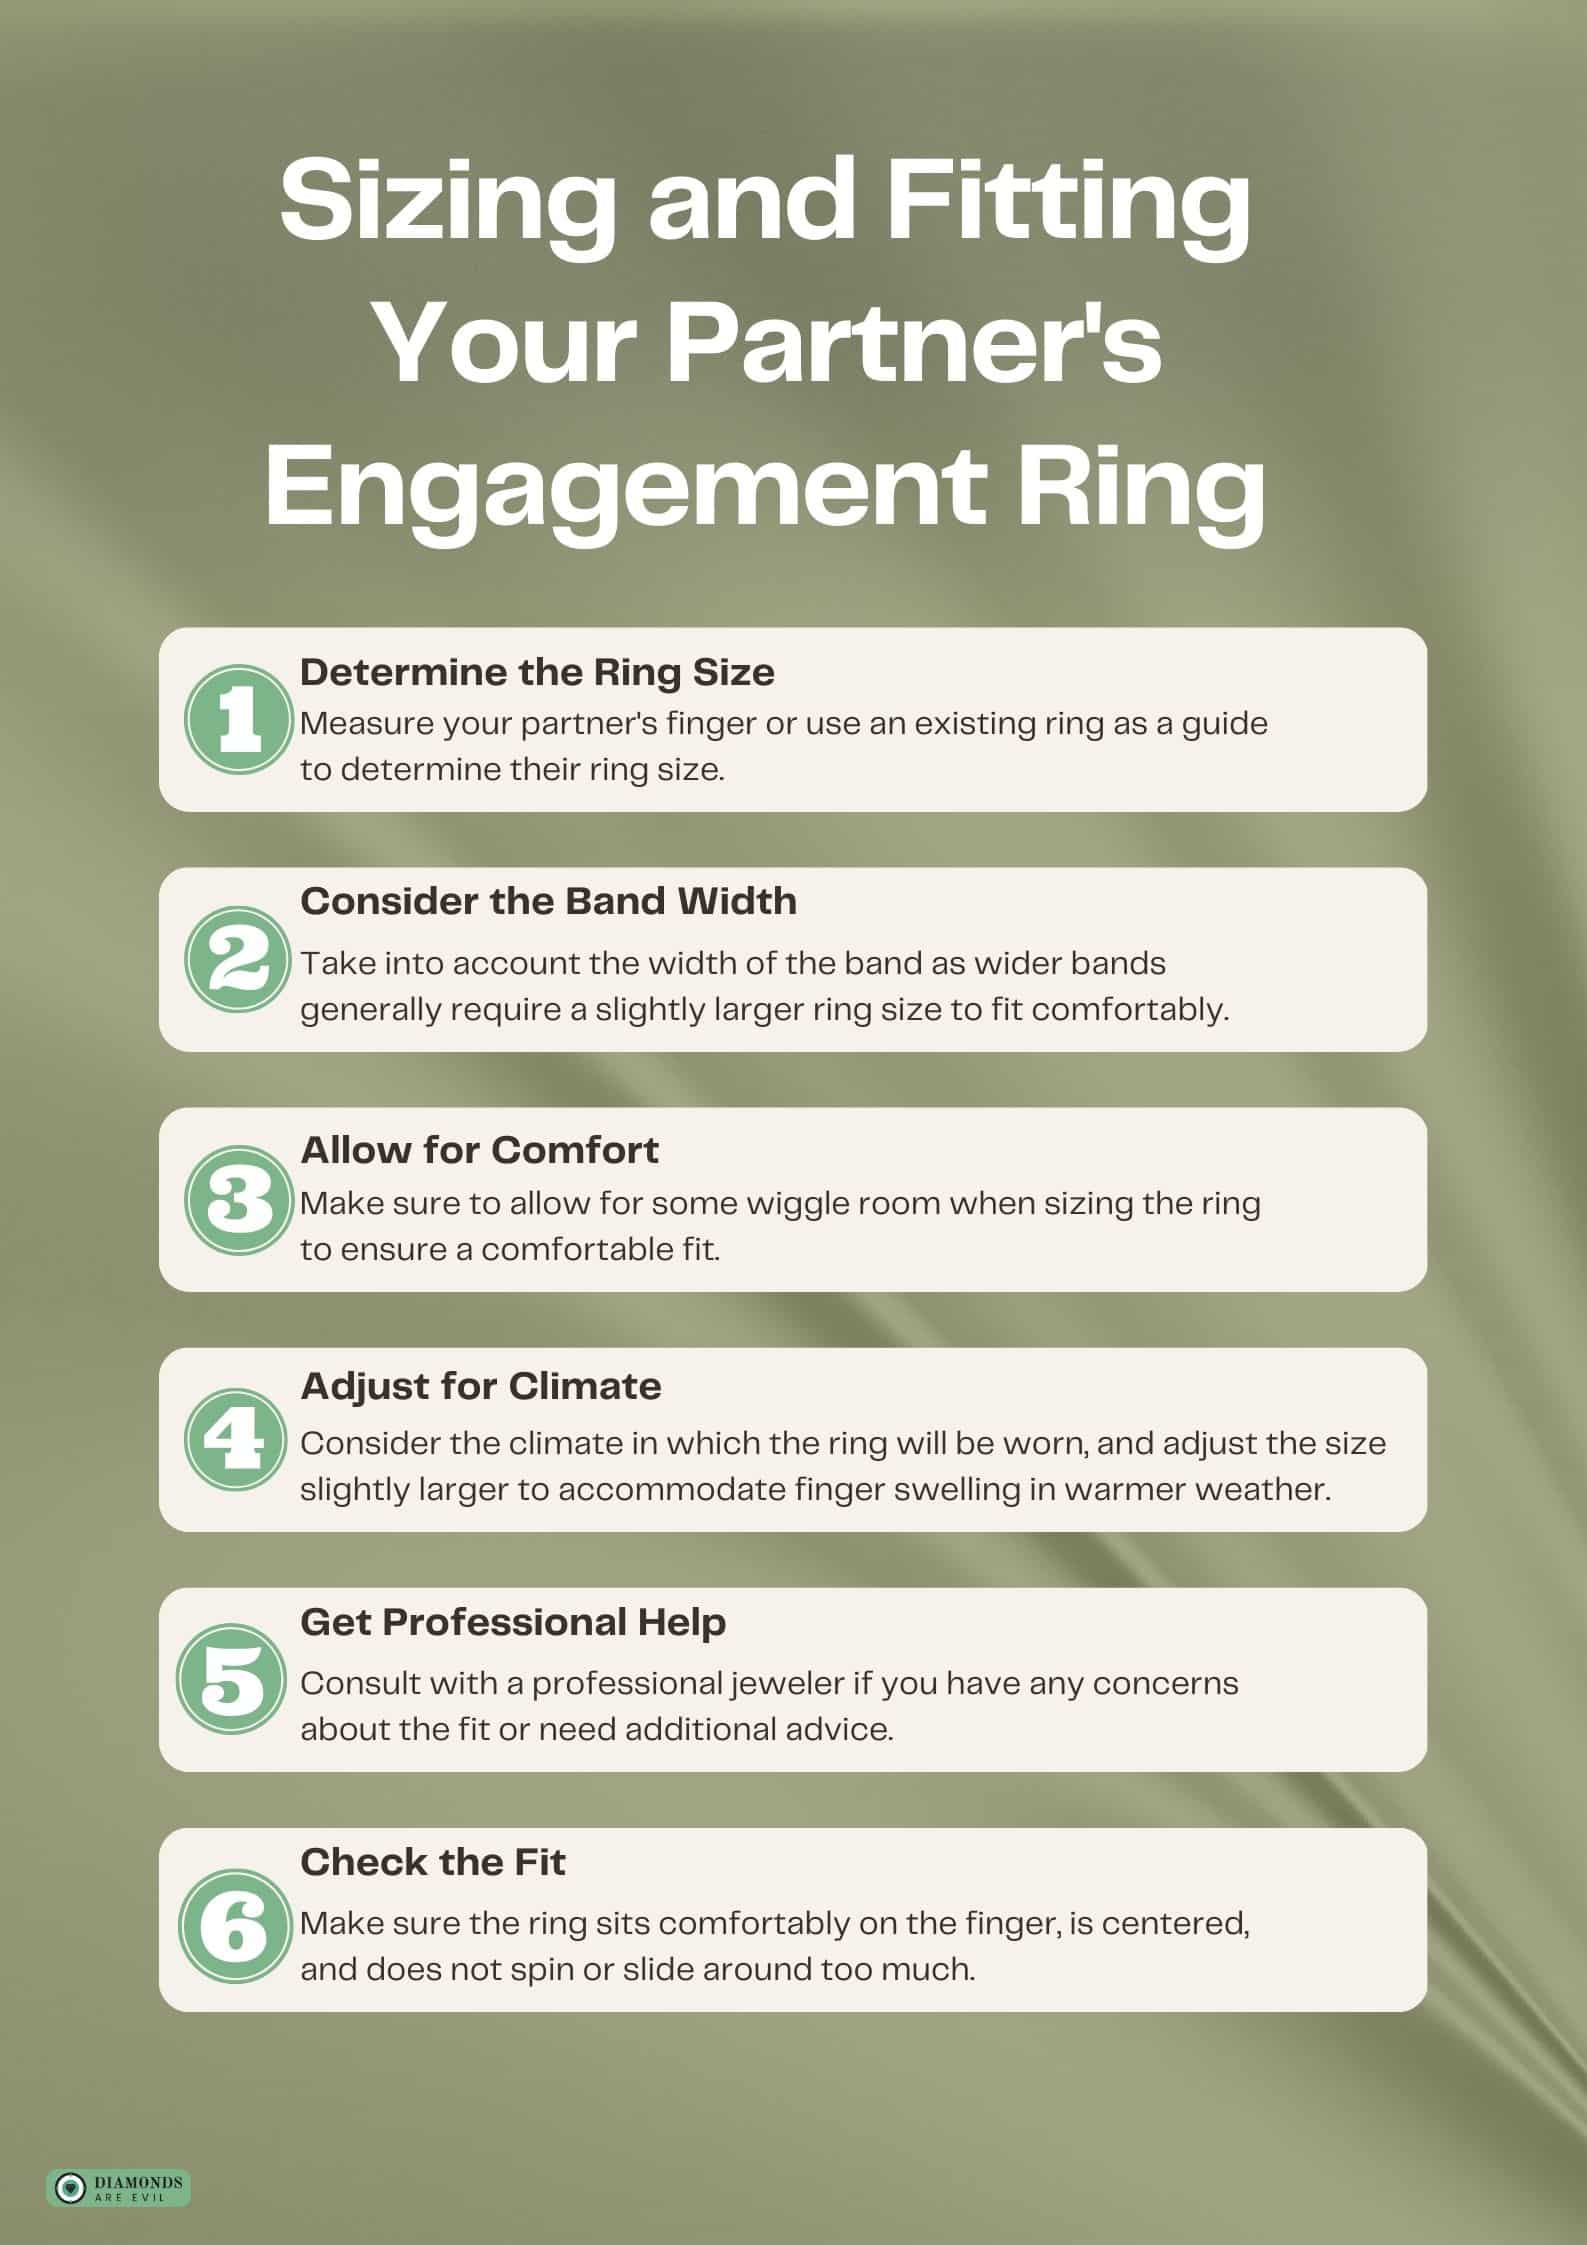 Sizing and Fitting Your Partner's Engagement Ring